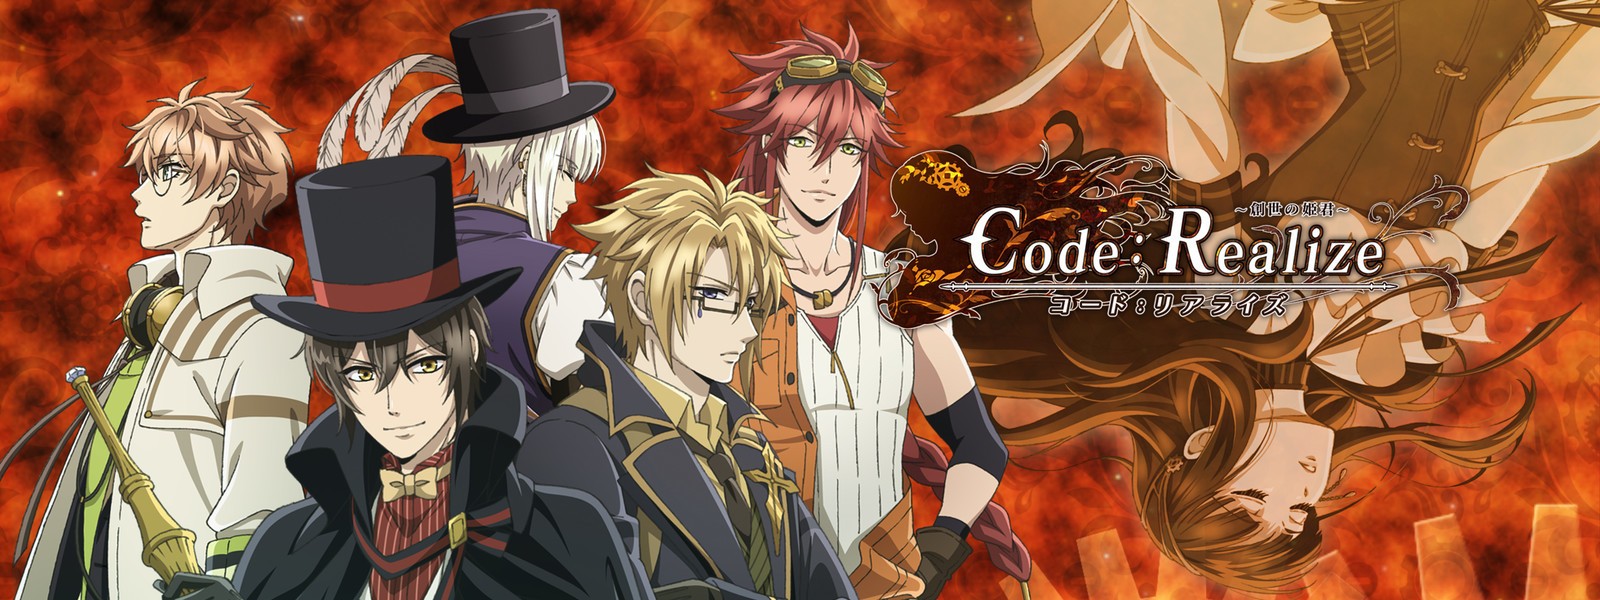 Code: Realize - Guardian of Rebirth (Anime), Code: Realize Wikia